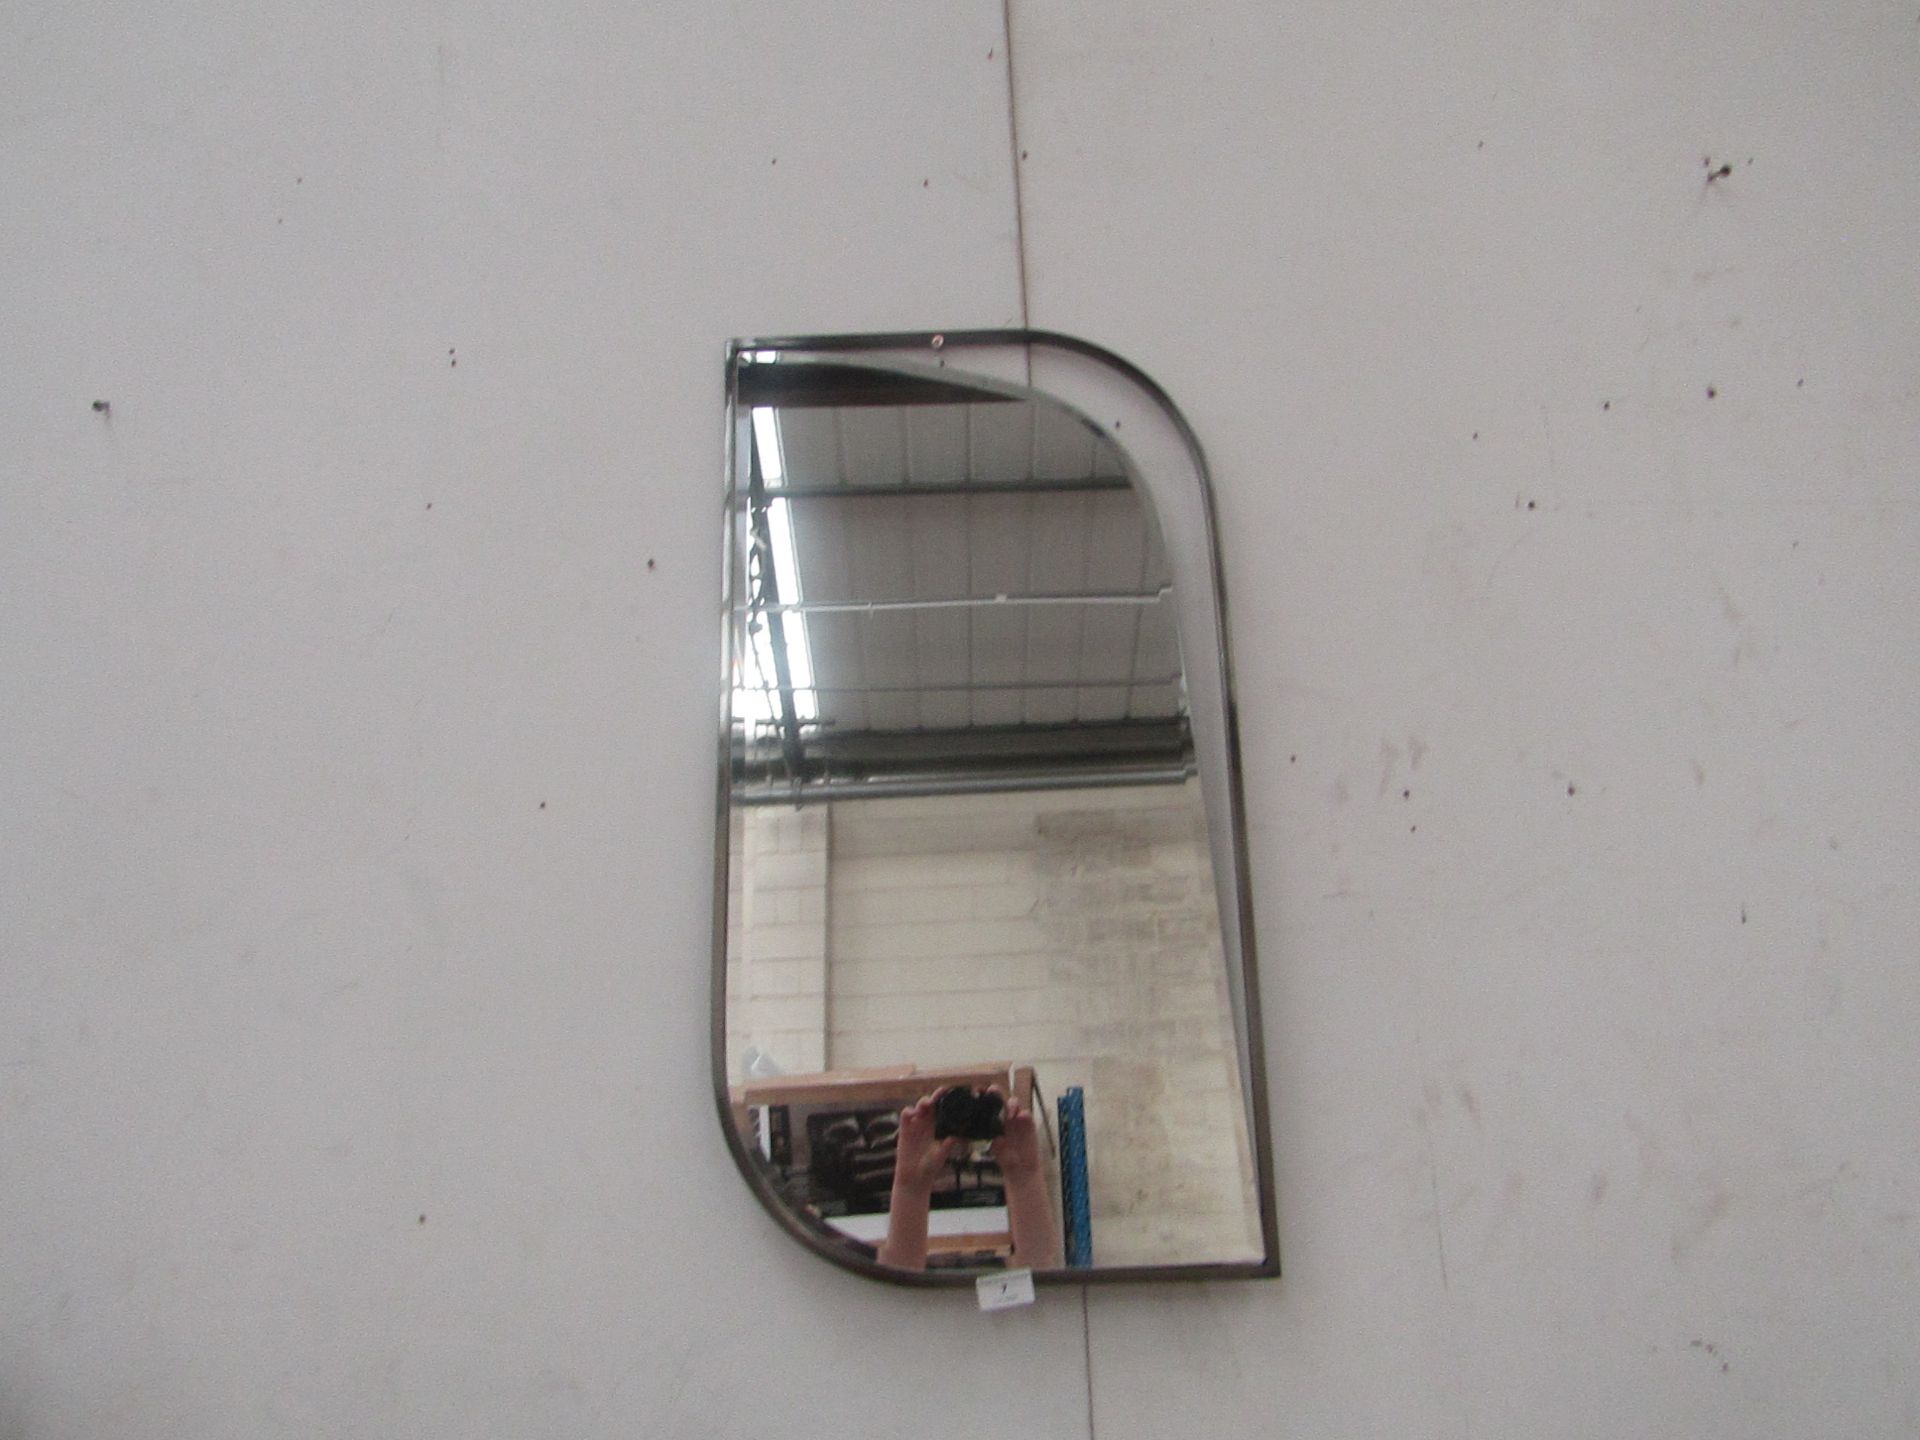 | 1X | AM PM ISANDRO MIRROR 75X40CM| LOOKS UNUSED AND BOXED | RRP CIRCA £160 |